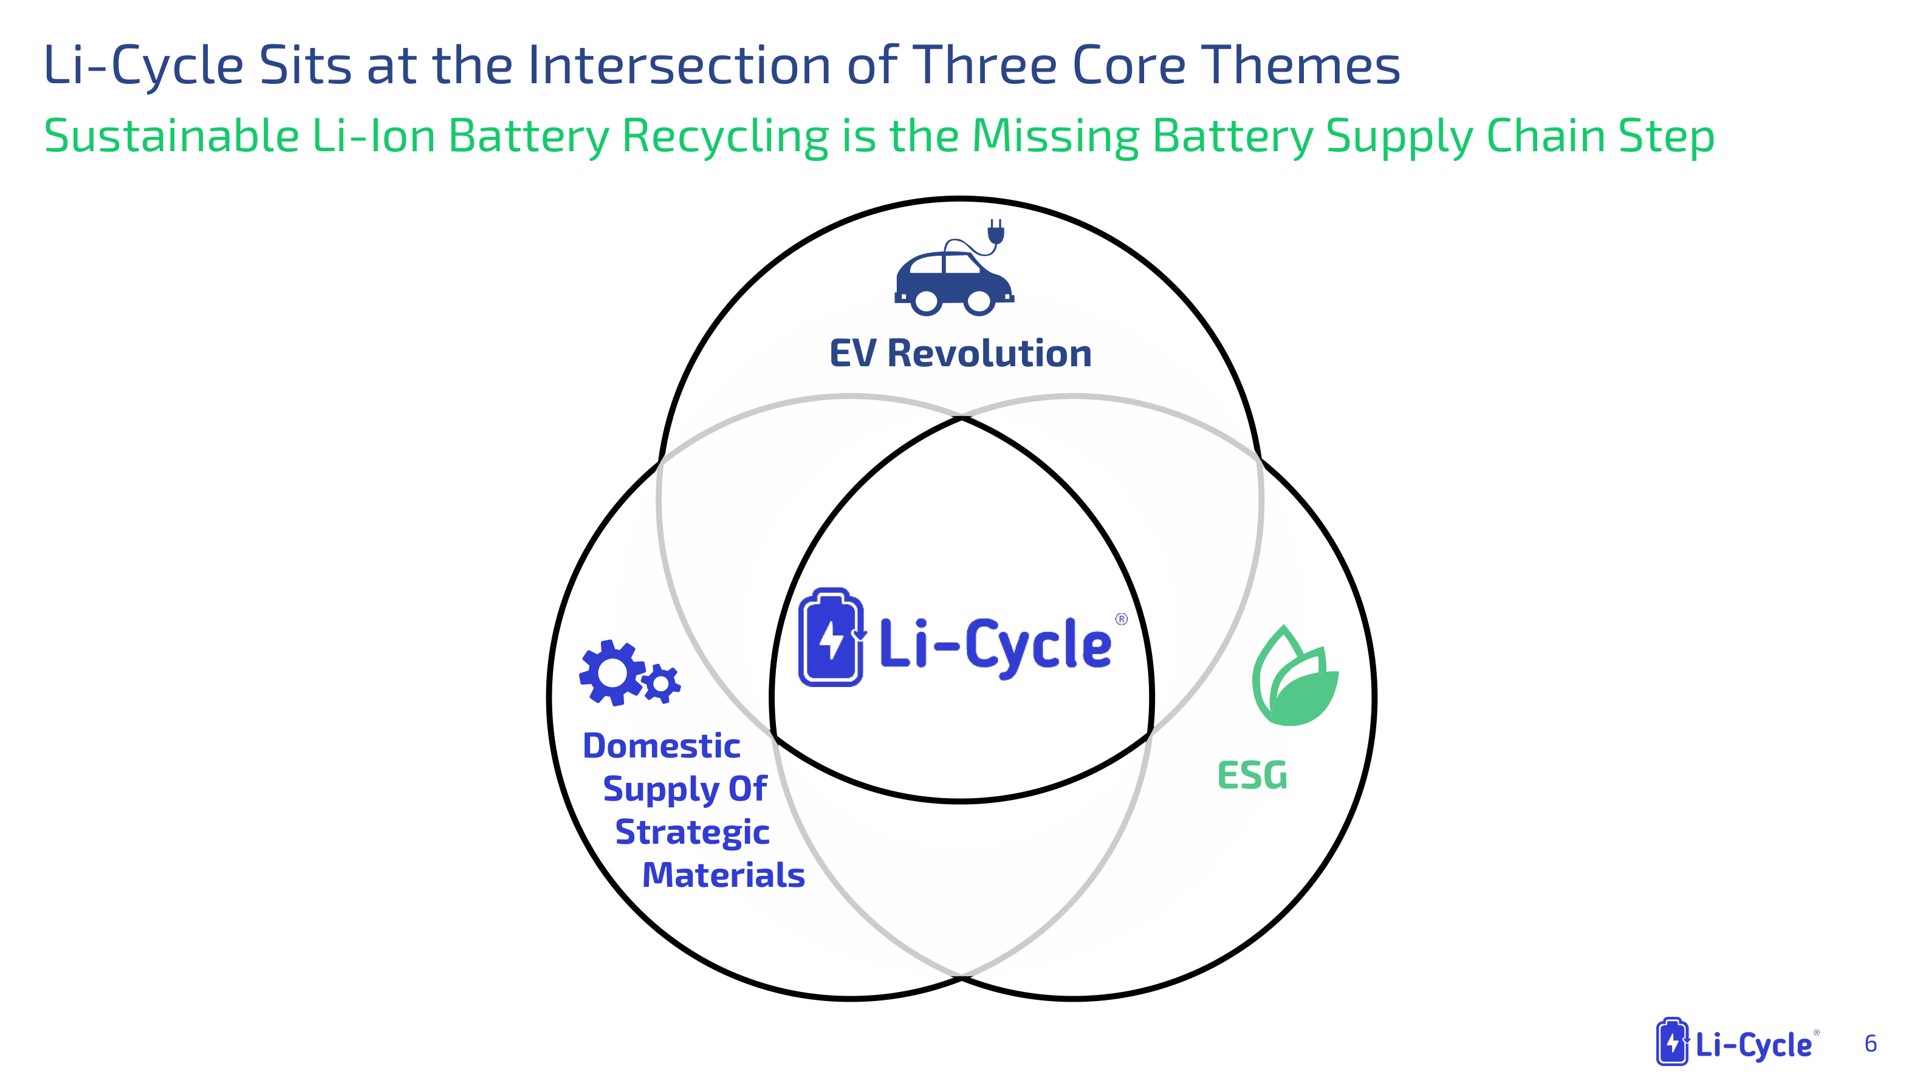 cycle sits at the intersection of three core themes sustainable ion battery recycling is the missing battery supply chain step mes | Li-Cycle